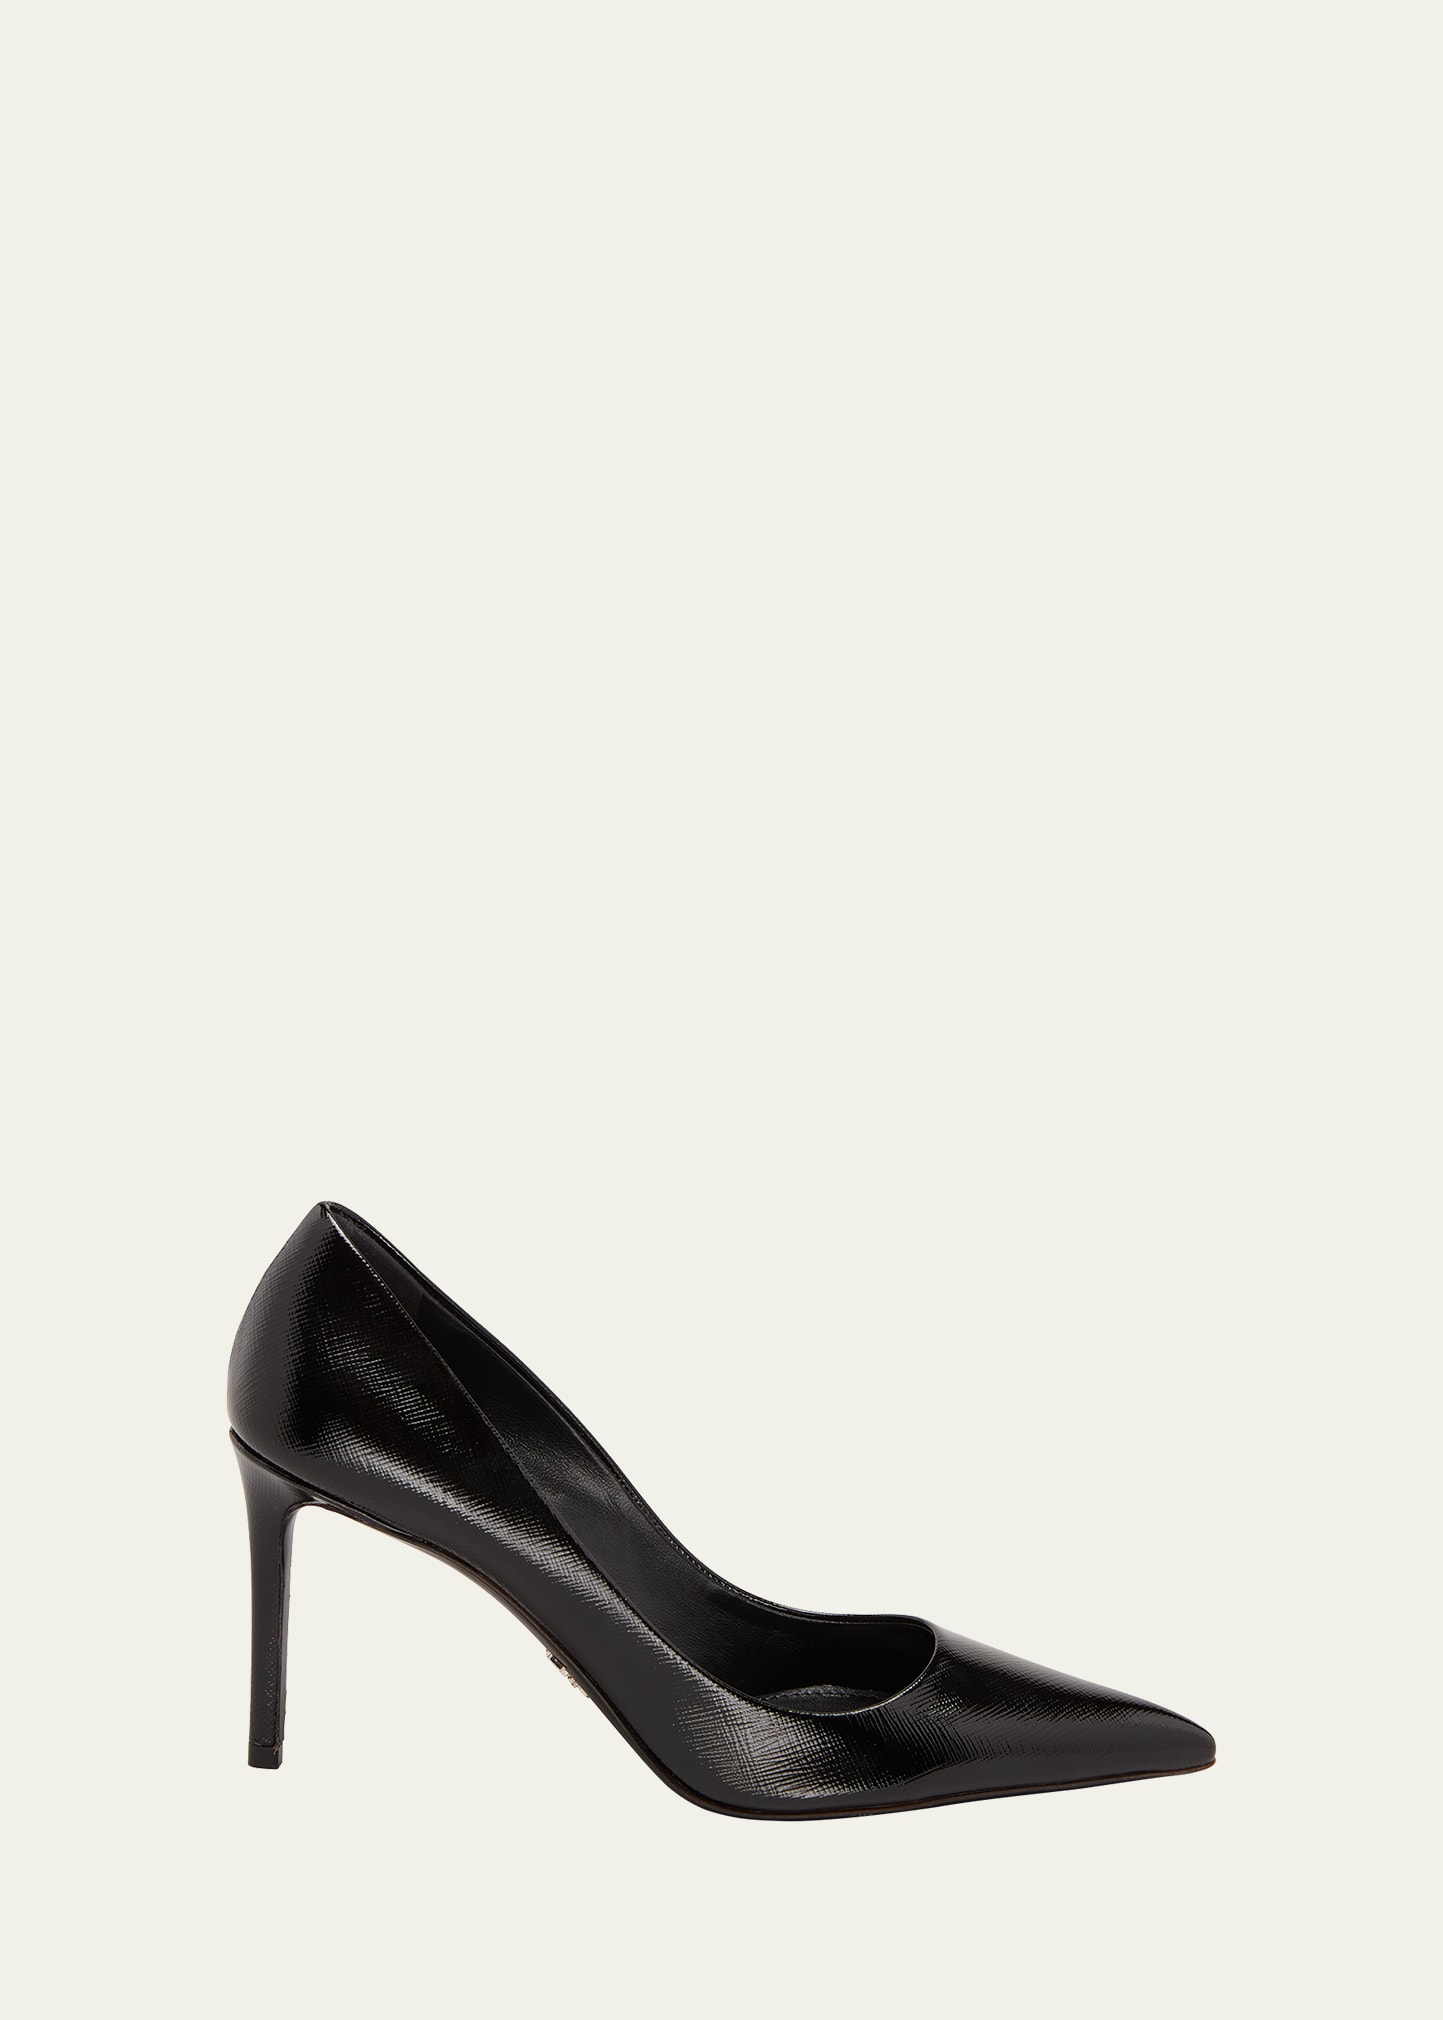 85mm Leather Pumps